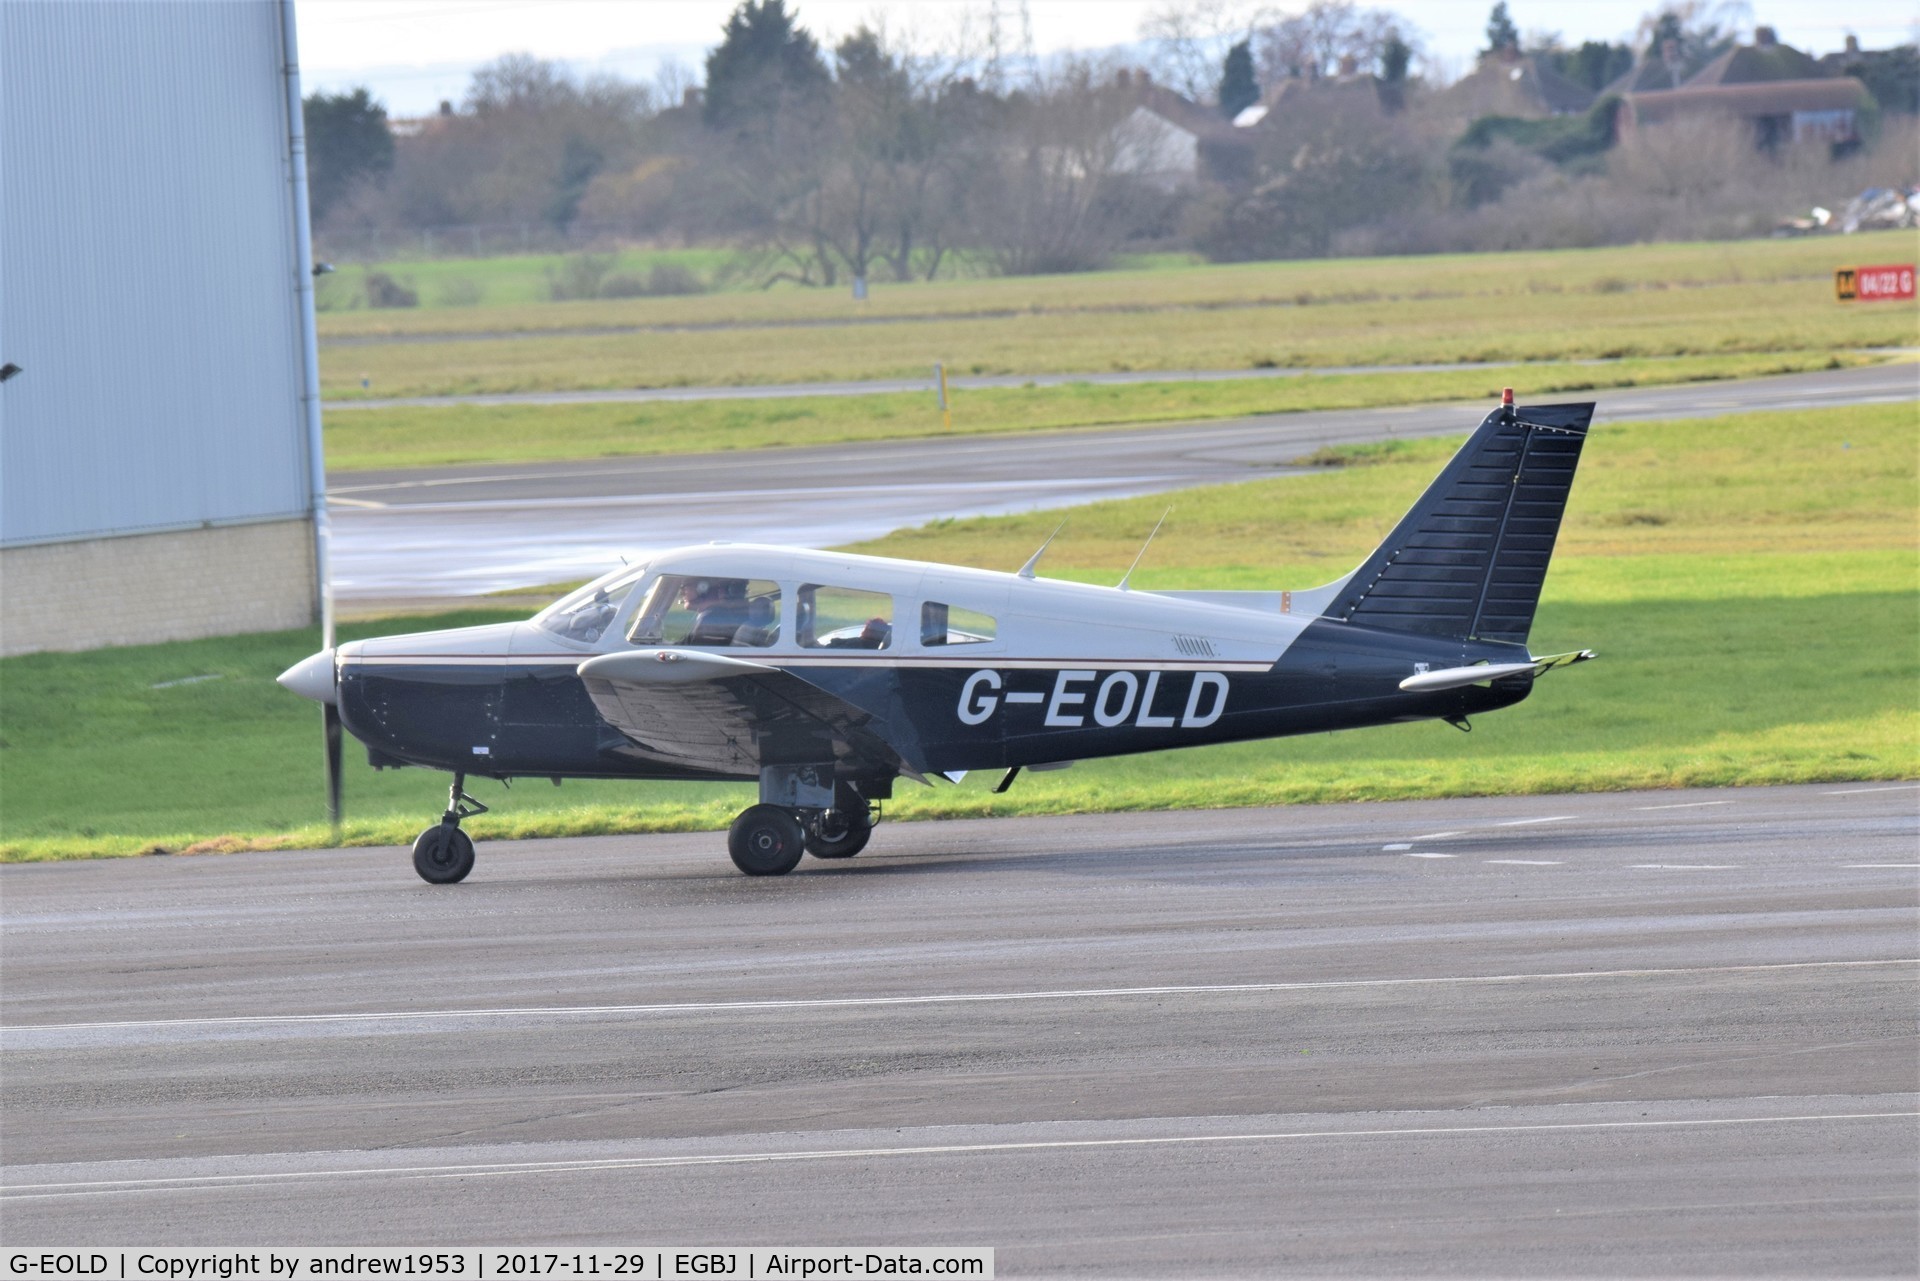 G-EOLD, 1985 Piper PA-28-161 Cherokee Warrior II C/N 28-8516030, G-EOLD at Gloucestershire Airport.